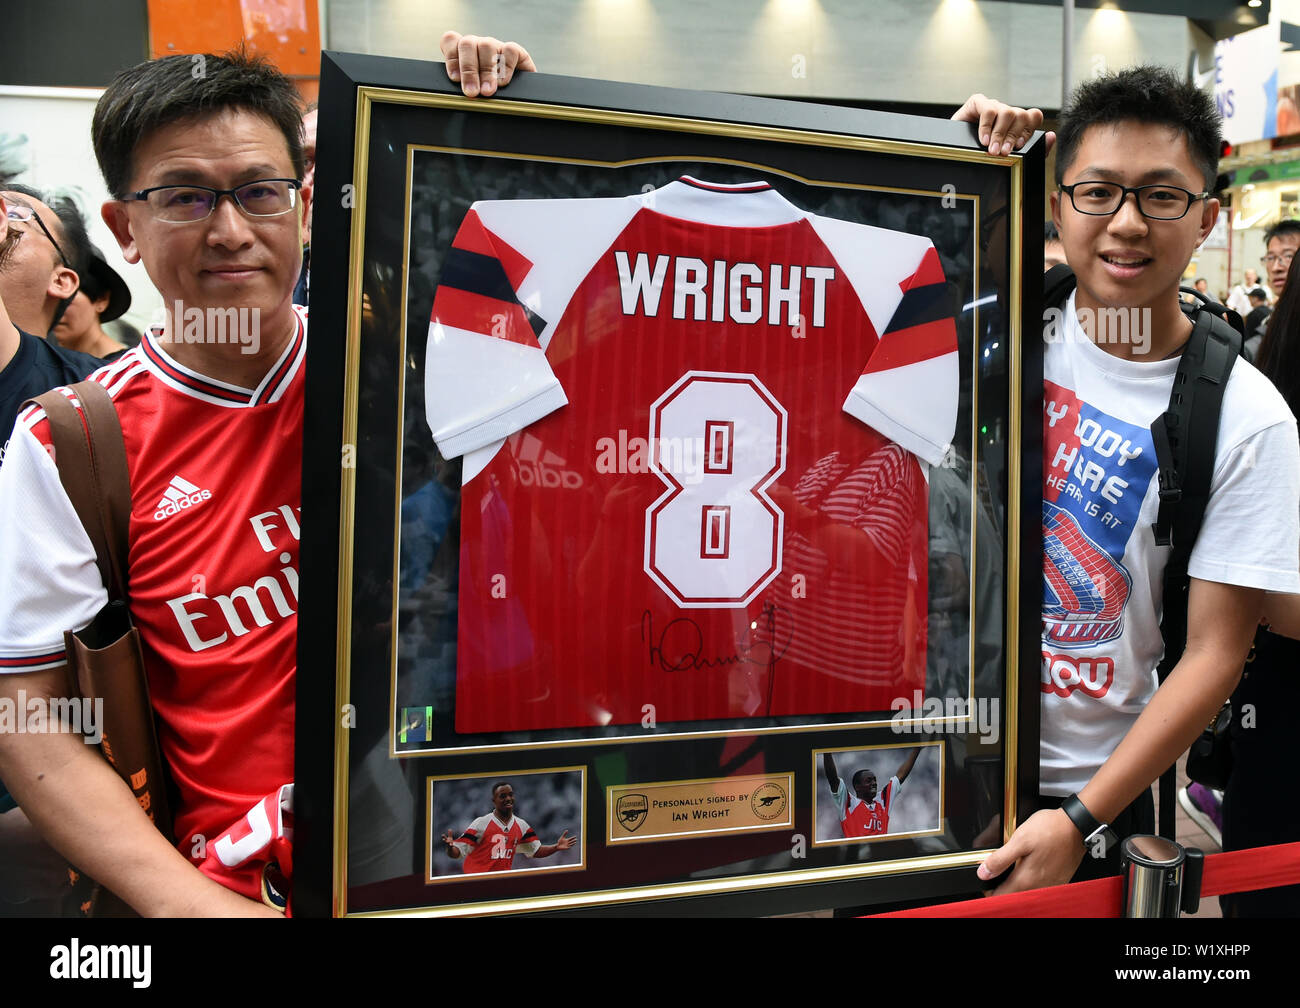 Fans show a team jersey of former English football player Ian Wright during  a promotional event for new team jersey of Arsenal F.C. of English football  league system at a sportswear store